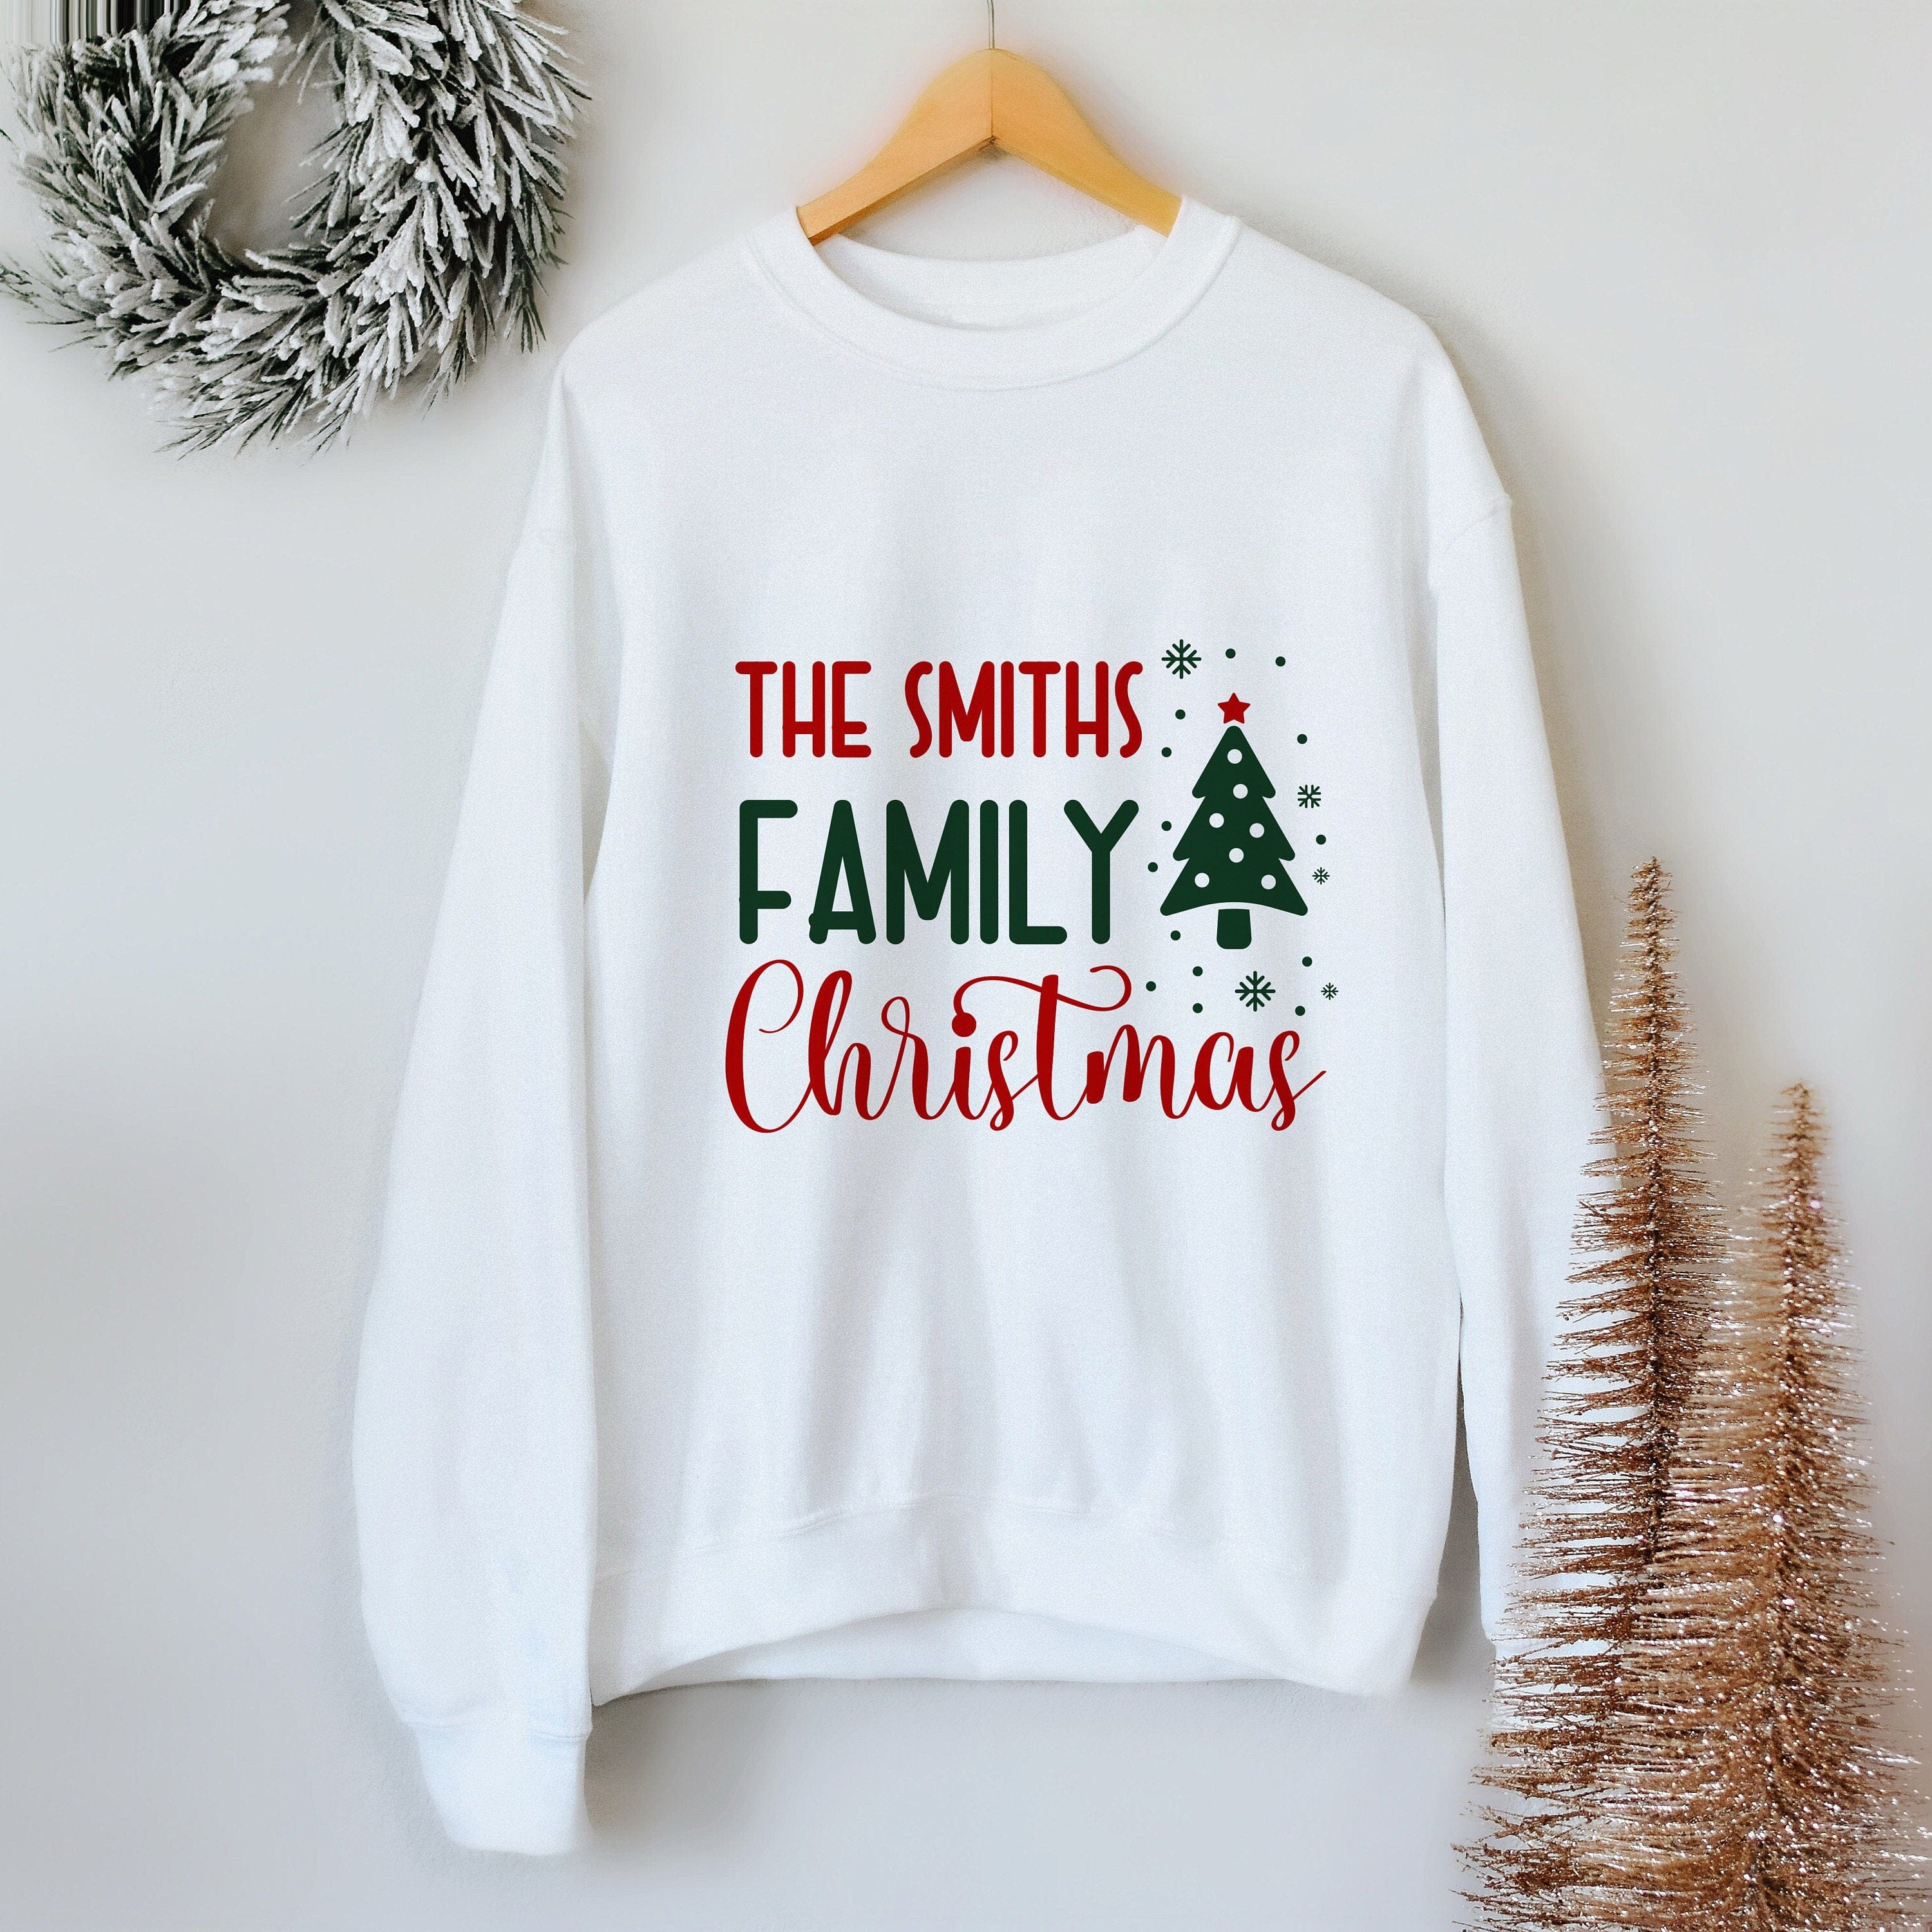 Personalised Family Christmas Jumper With Names, Matching Sweatshirt With Christmas Tree Design